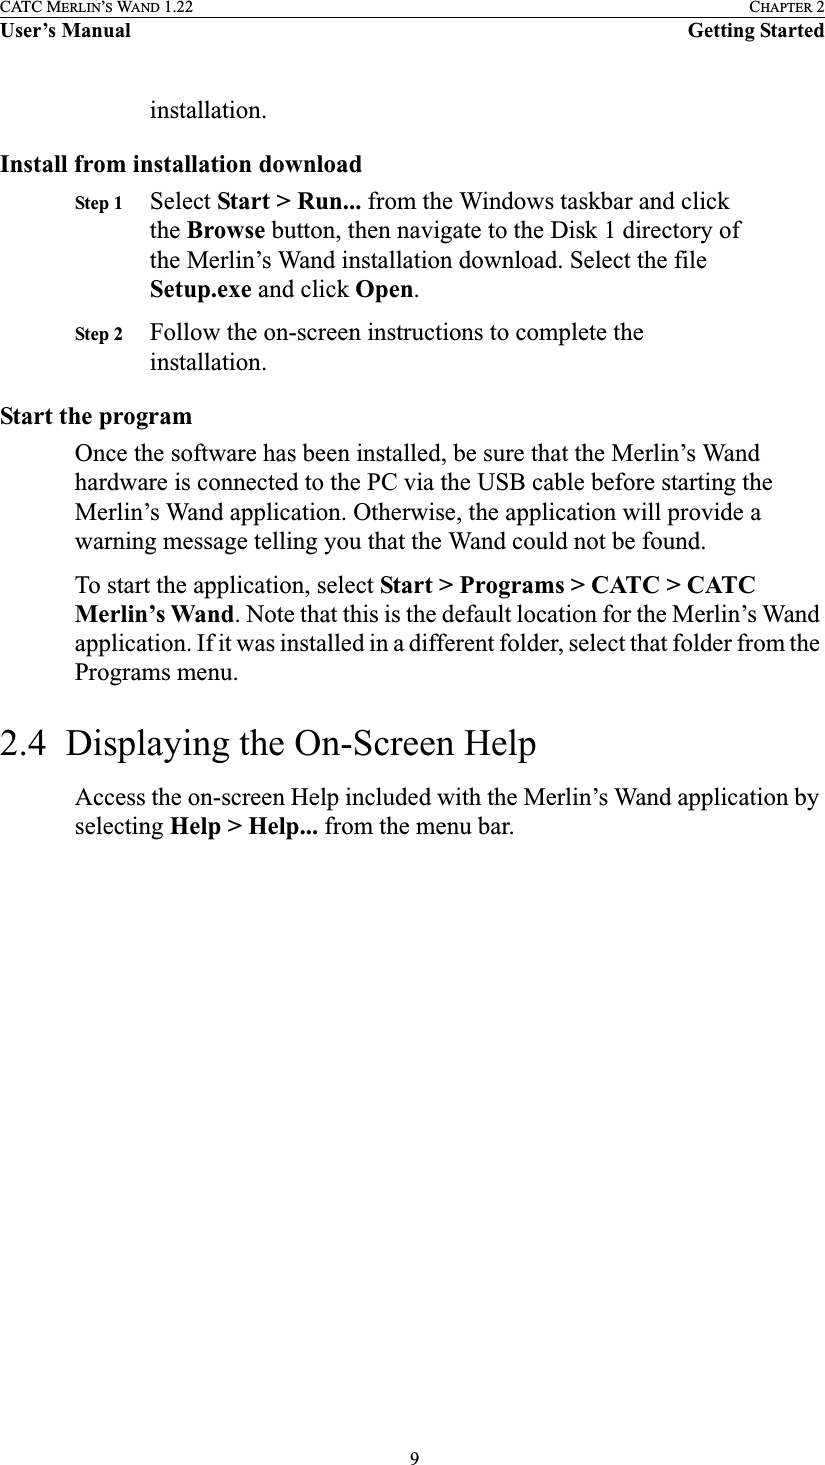  9CATC MERLIN’S WAND 1.22 CHAPTER 2User’s Manual Getting Startedinstallation.Install from installation downloadStep 1 Select Start &gt; Run... from the Windows taskbar and click the Browse button, then navigate to the Disk 1 directory of the Merlin’s Wand installation download. Select the file Setup.exe and click Open.Step 2 Follow the on-screen instructions to complete the installation.Start the programOnce the software has been installed, be sure that the Merlin’s Wand hardware is connected to the PC via the USB cable before starting the Merlin’s Wand application. Otherwise, the application will provide a warning message telling you that the Wand could not be found.To start the application, select Start &gt; Programs &gt; CATC &gt; CATC Merlin’s Wand. Note that this is the default location for the Merlin’s Wand application. If it was installed in a different folder, select that folder from the Programs menu.2.4  Displaying the On-Screen HelpAccess the on-screen Help included with the Merlin’s Wand application by selecting Help &gt; Help... from the menu bar.